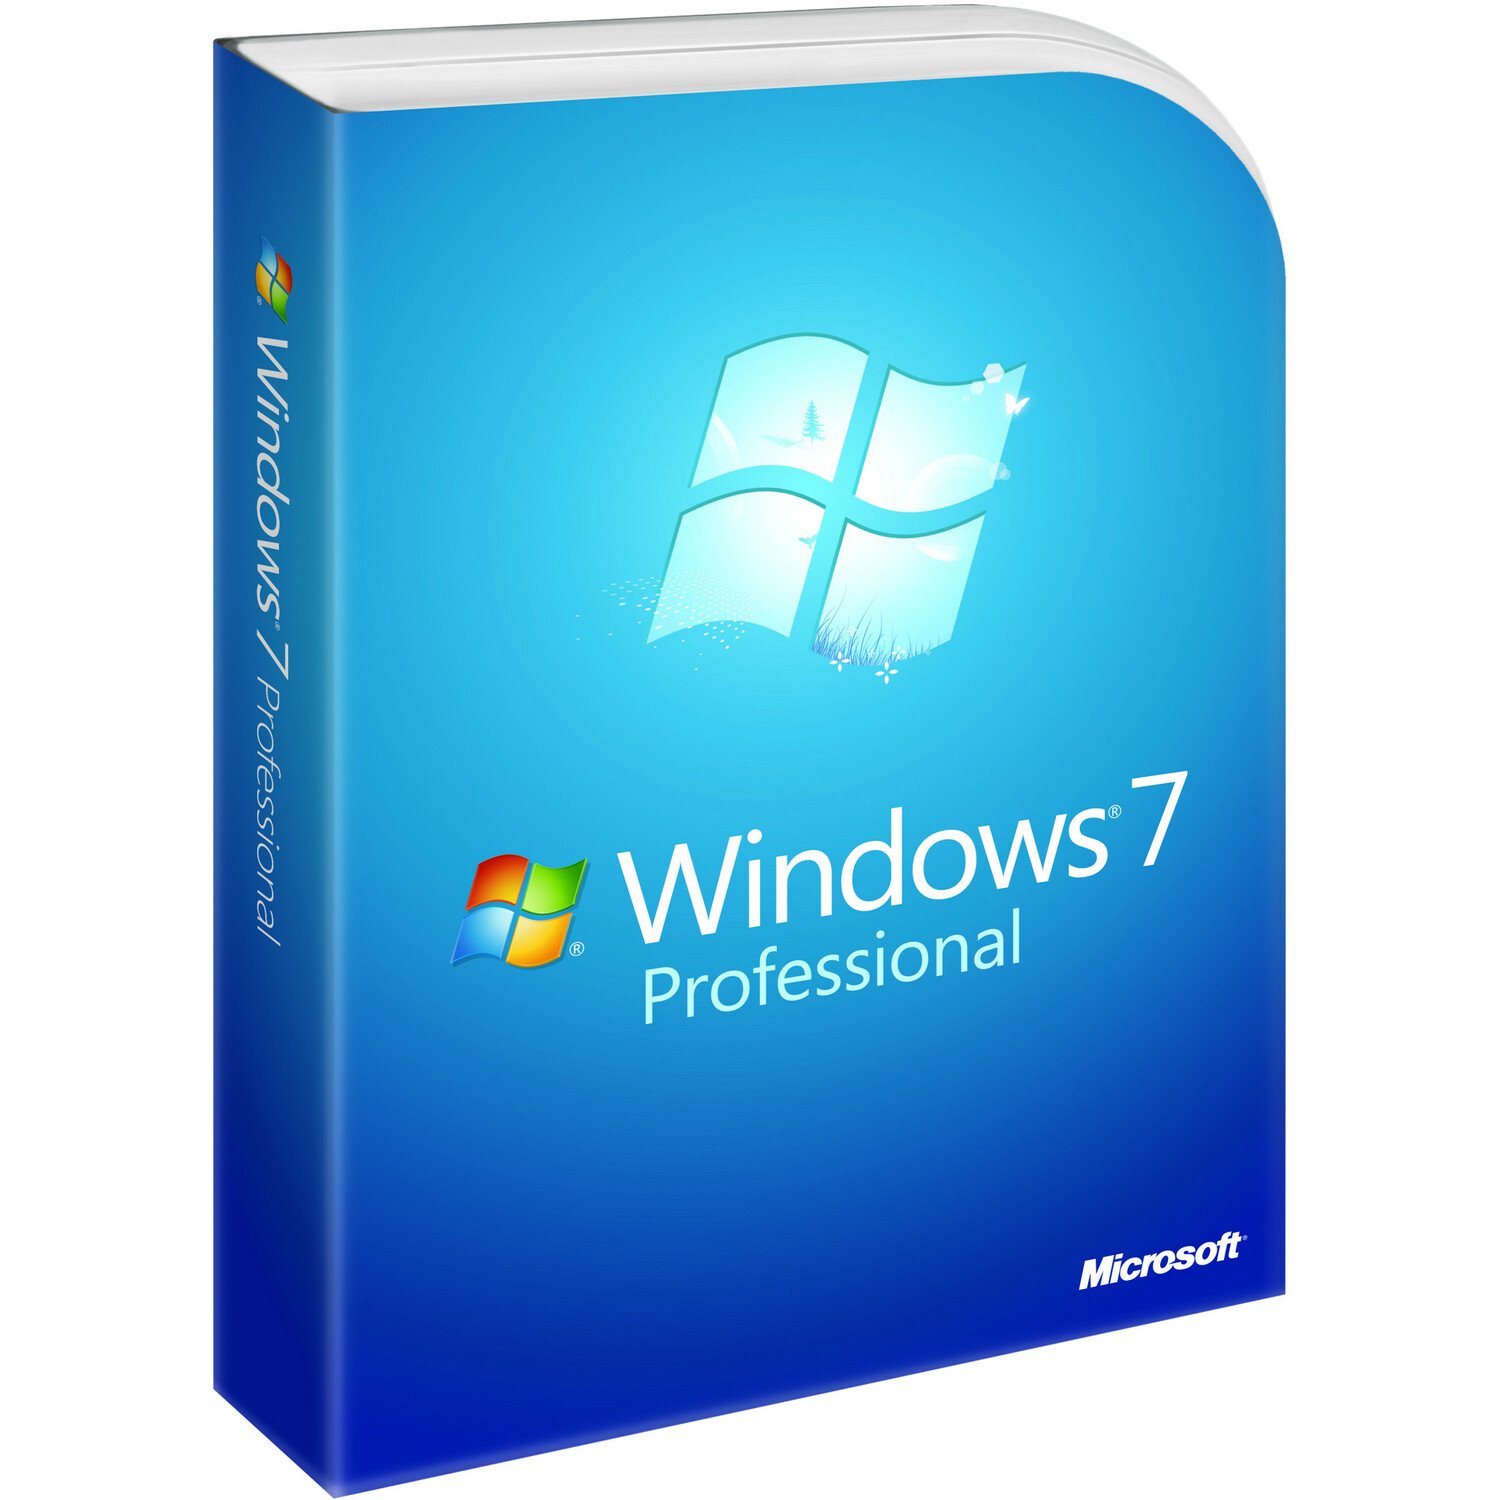 Microsoft Windows 7 Professional With Service Pack 1 64-bit - License and Media - 1 PC - OEM